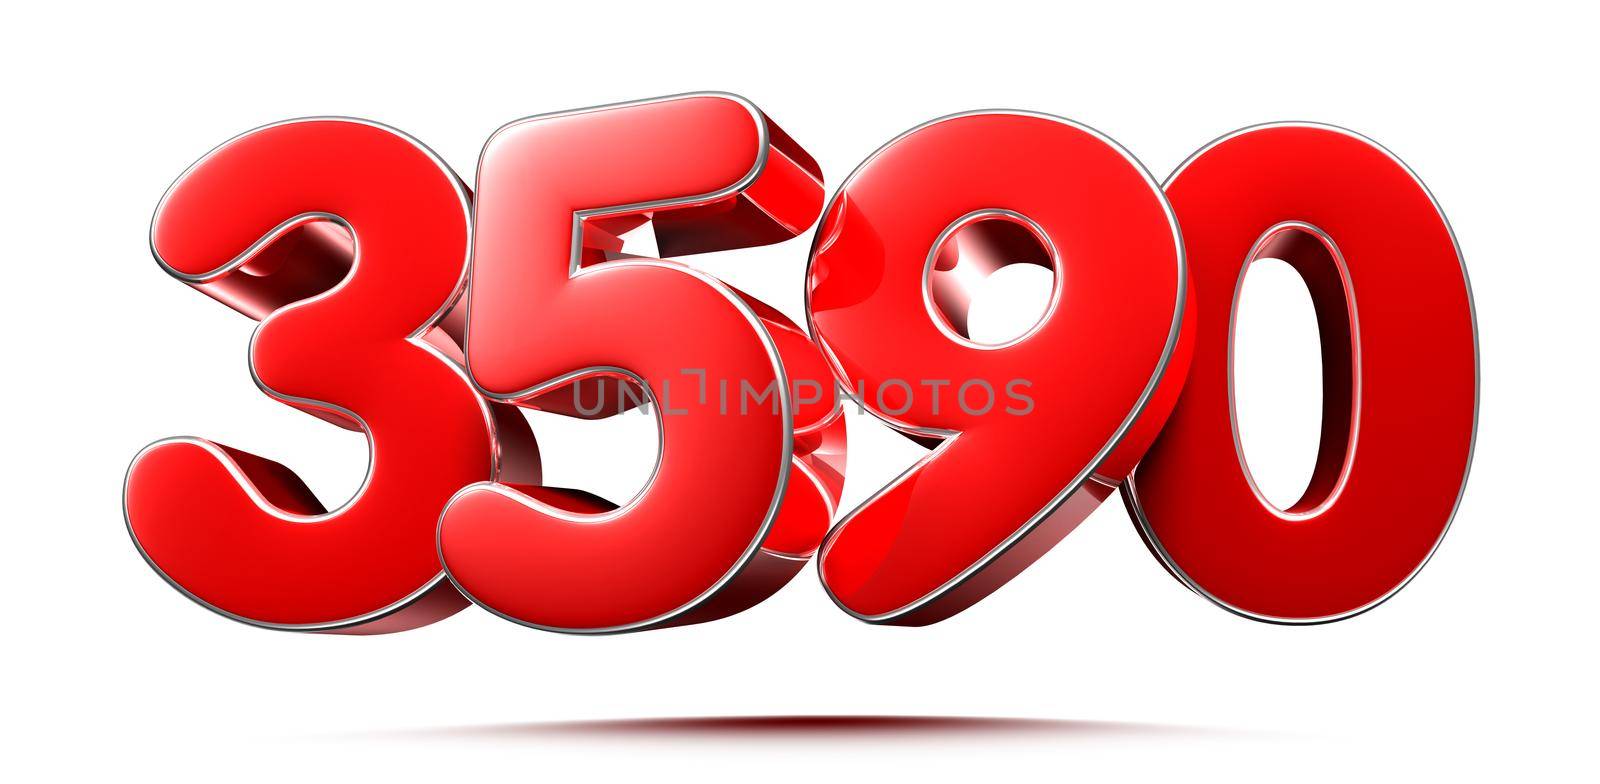 Rounded red numbers 3590 on white background 3D illustration with clipping path by thitimontoyai